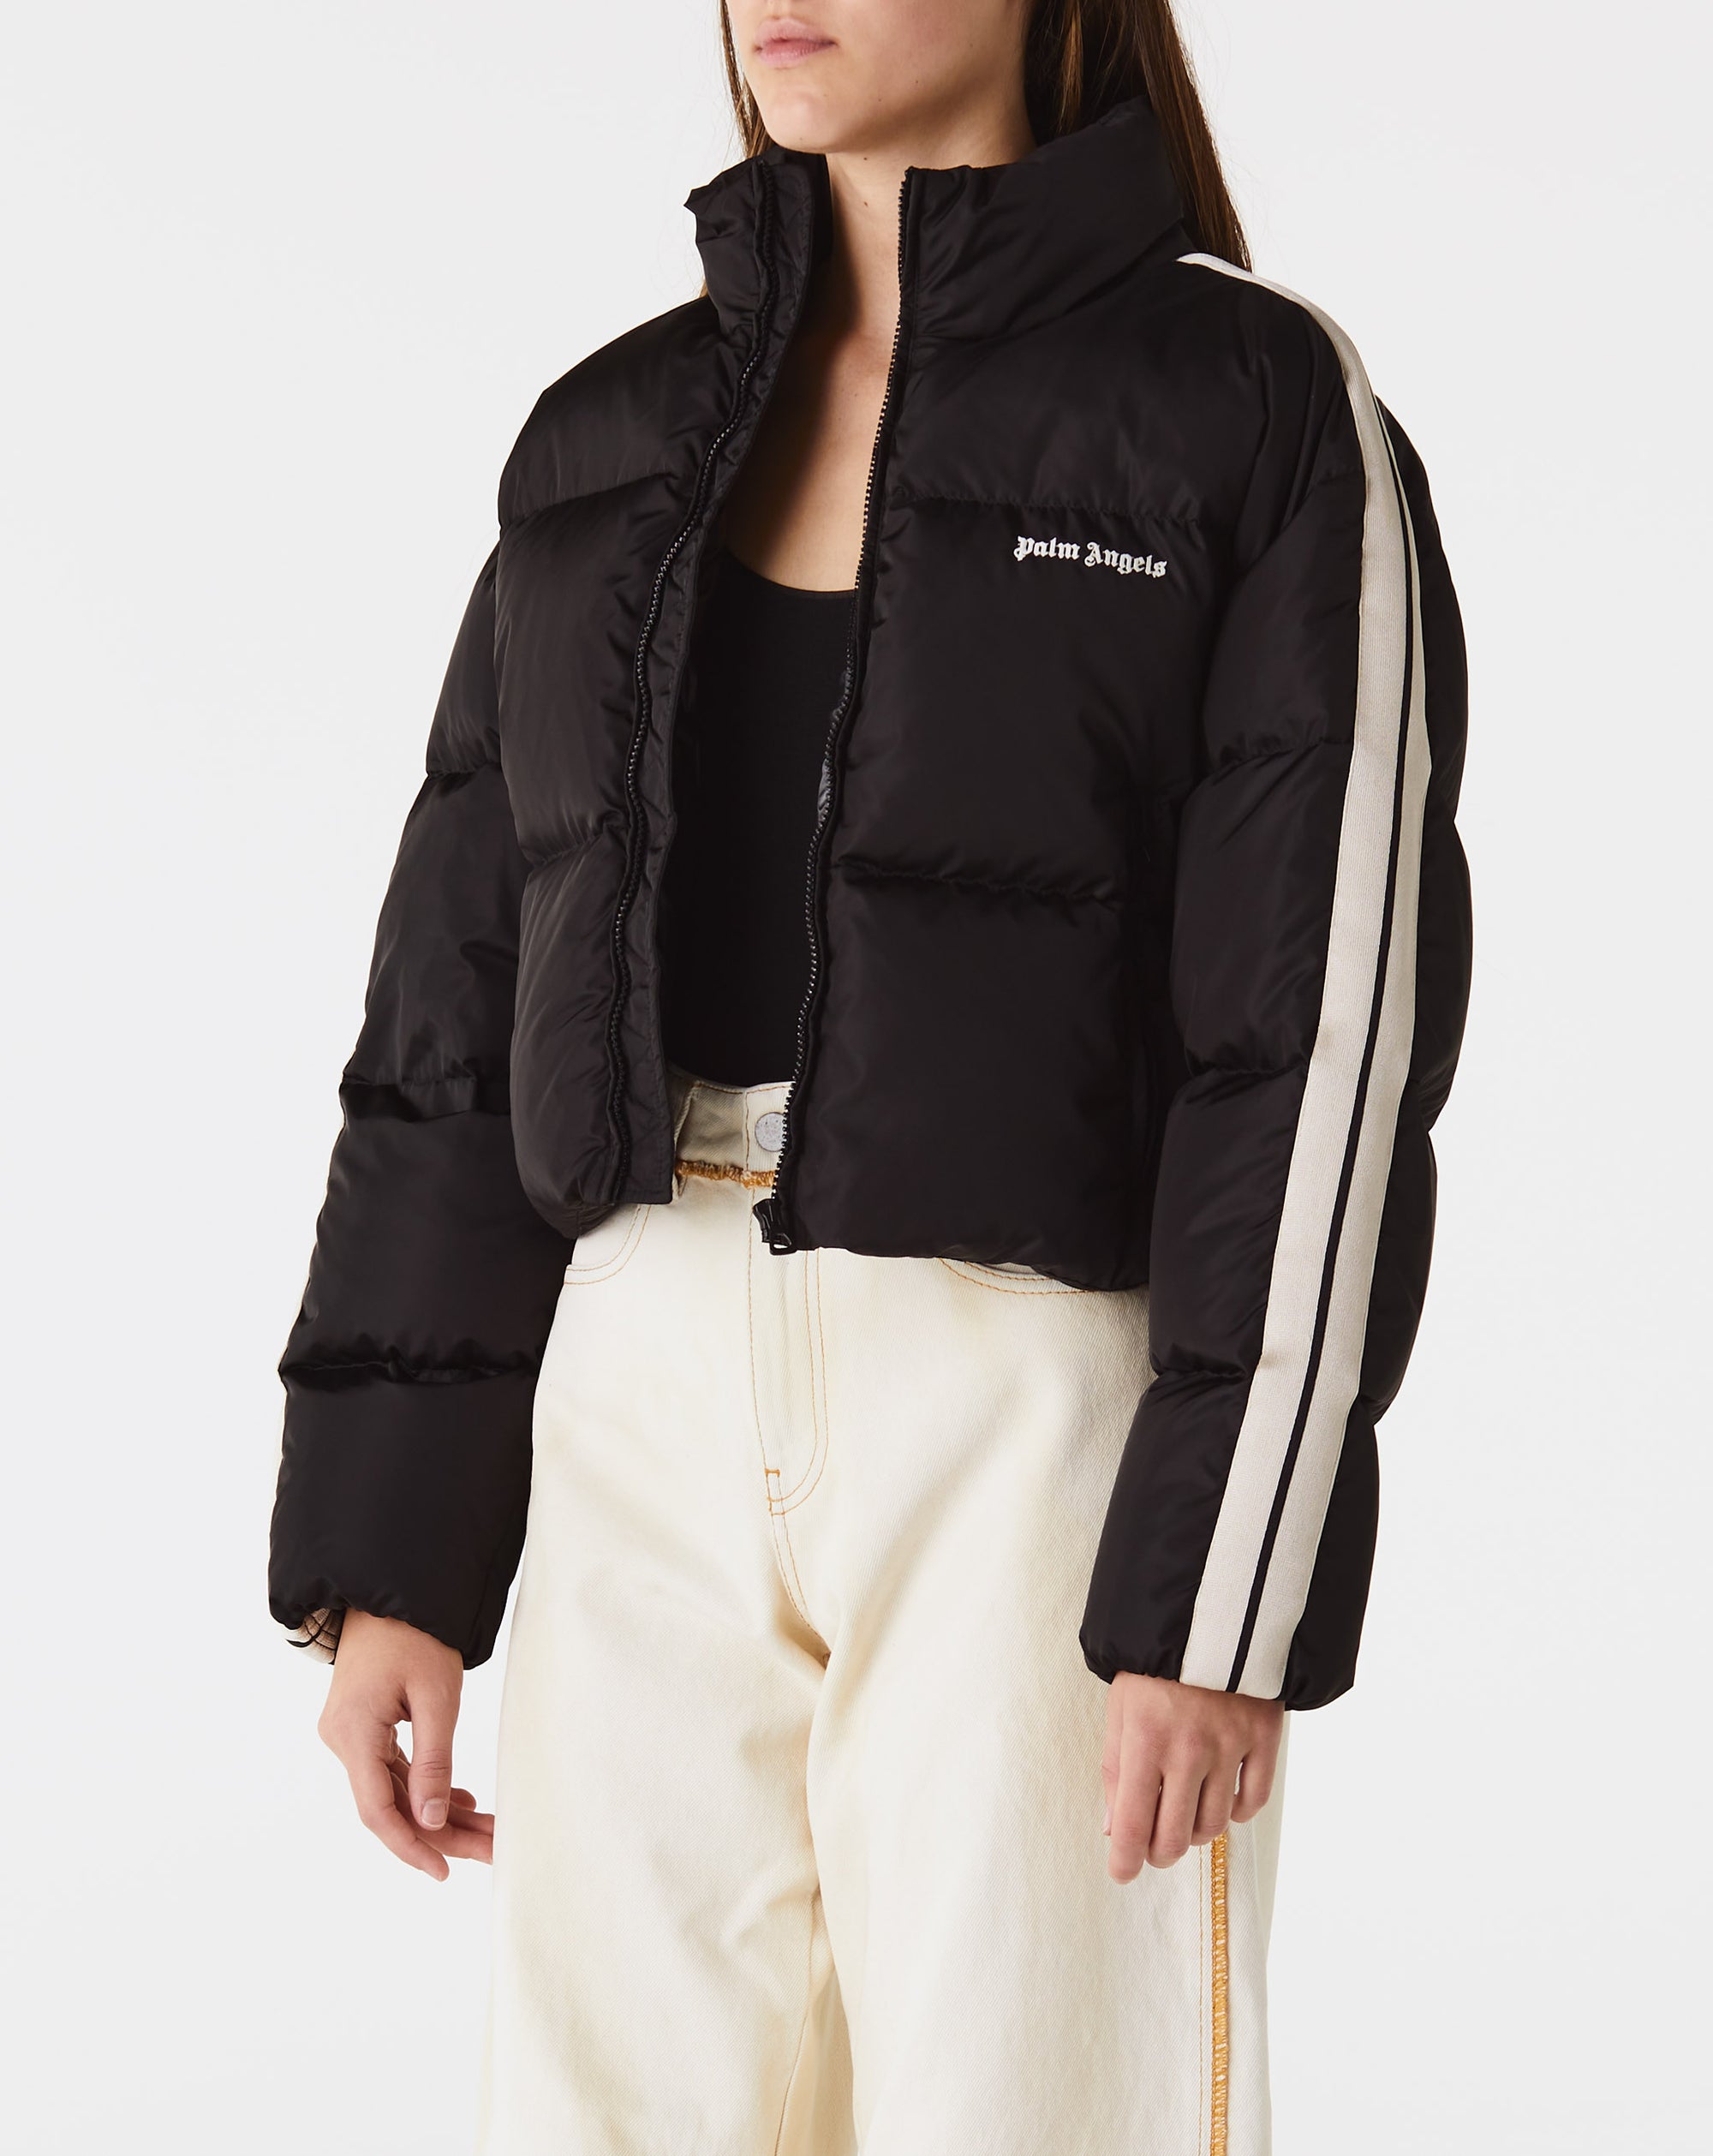 Palm Angels Women's Crop Track Down Jacket - Rule of Next Apparel